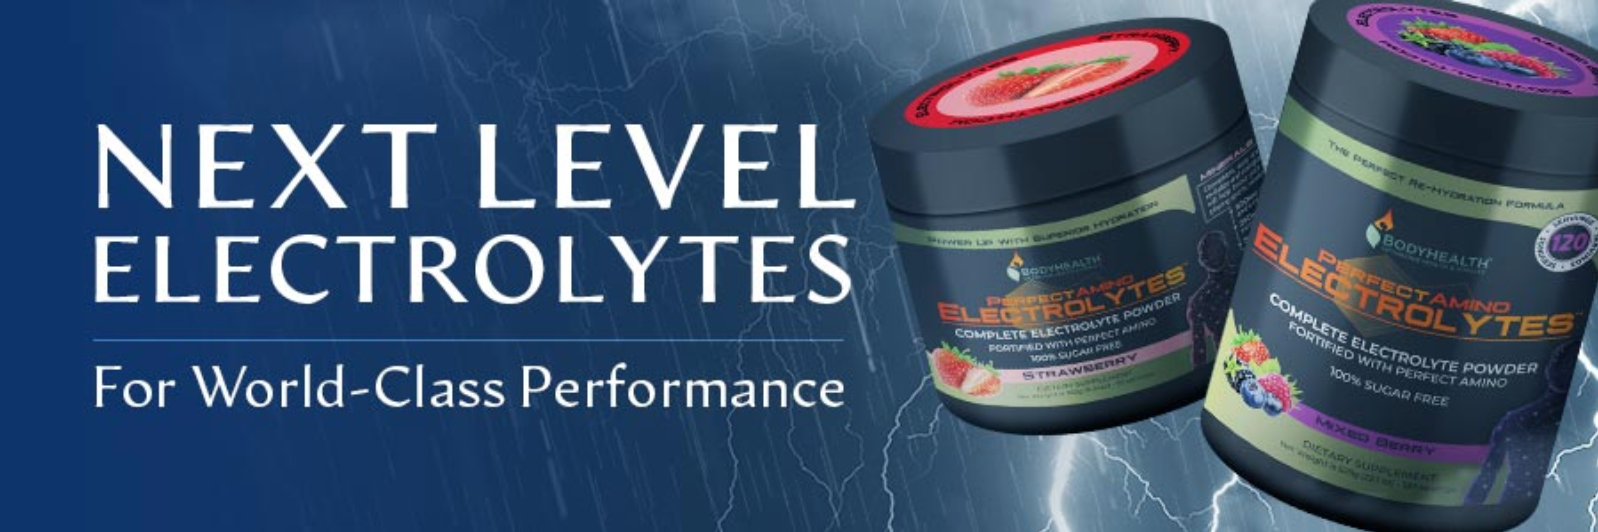 Next Level Electrolytes for World-Class Performance